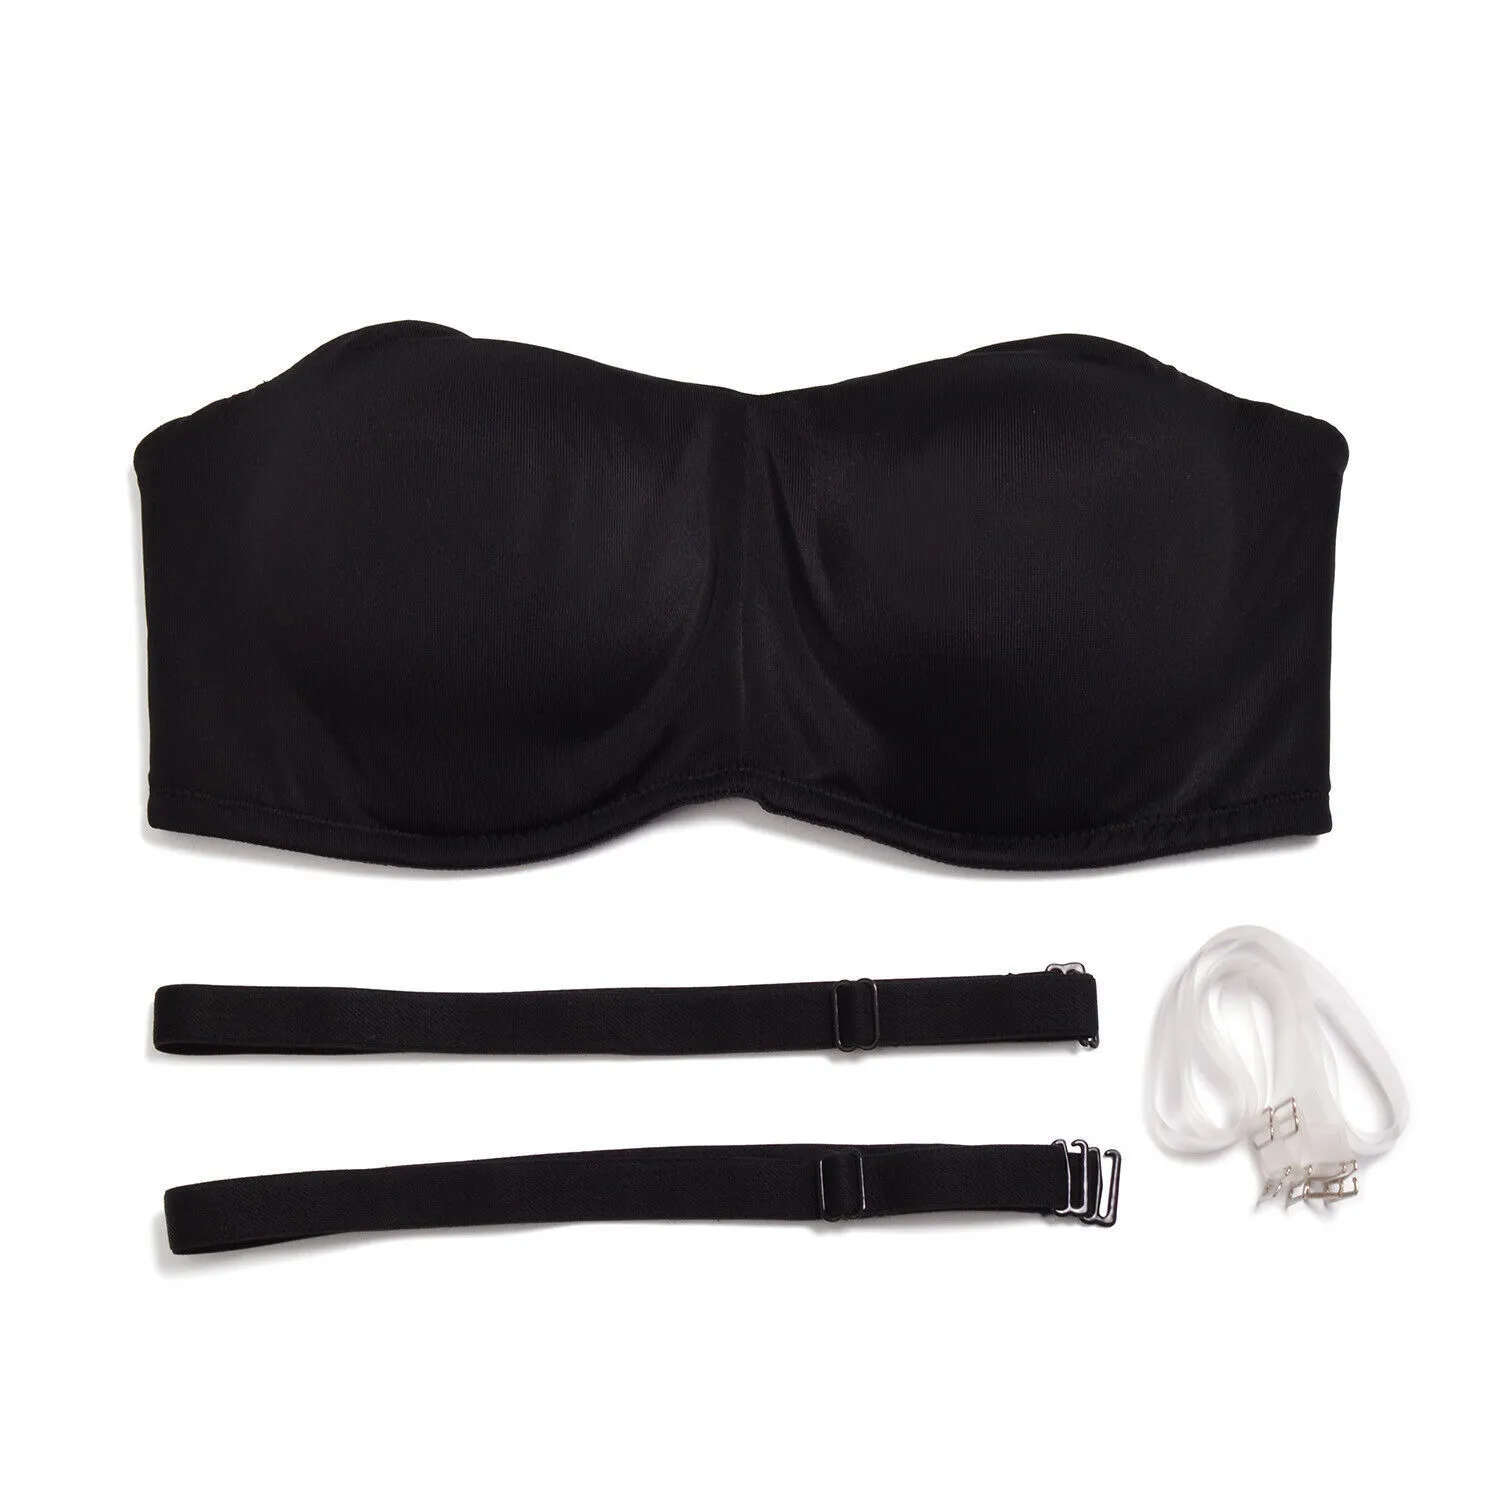 Sexy Strapless Push Up Bra With Transparent Chest Straps Plus Size